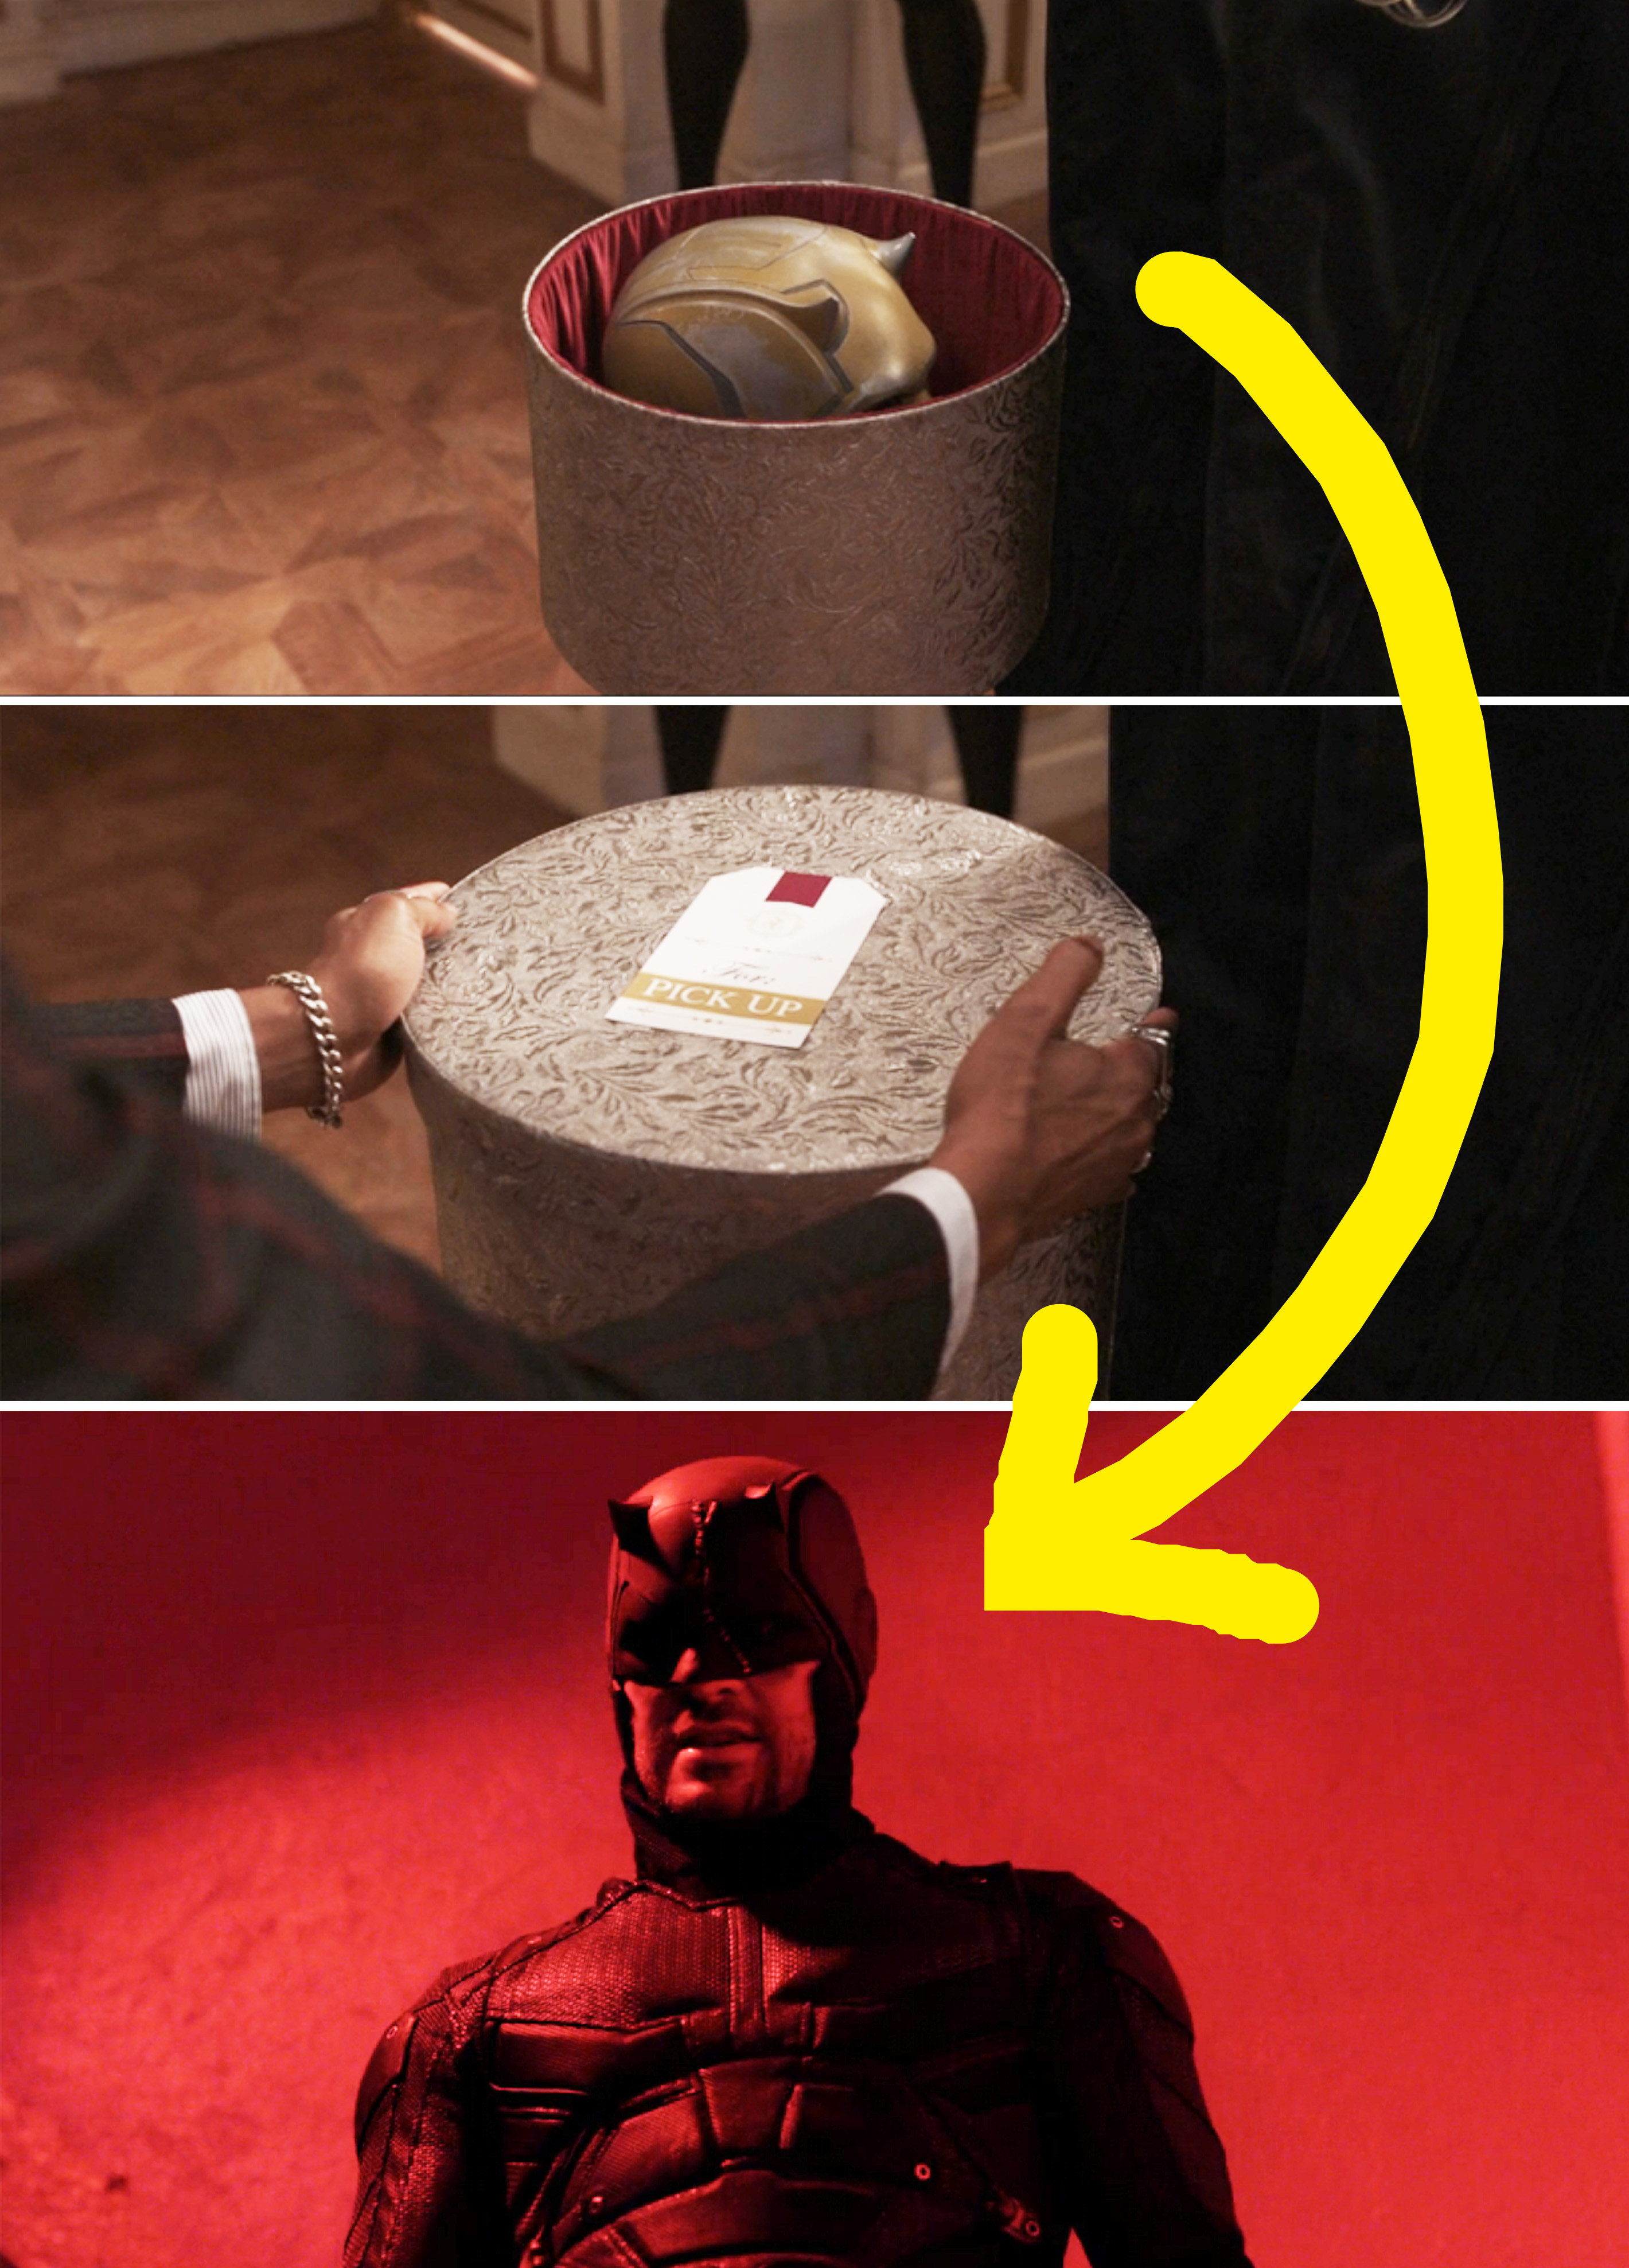 The yellow helmet juxtaposed with a shot of Daredevil from his TV show, in which his helmet and the rest of his suit was red